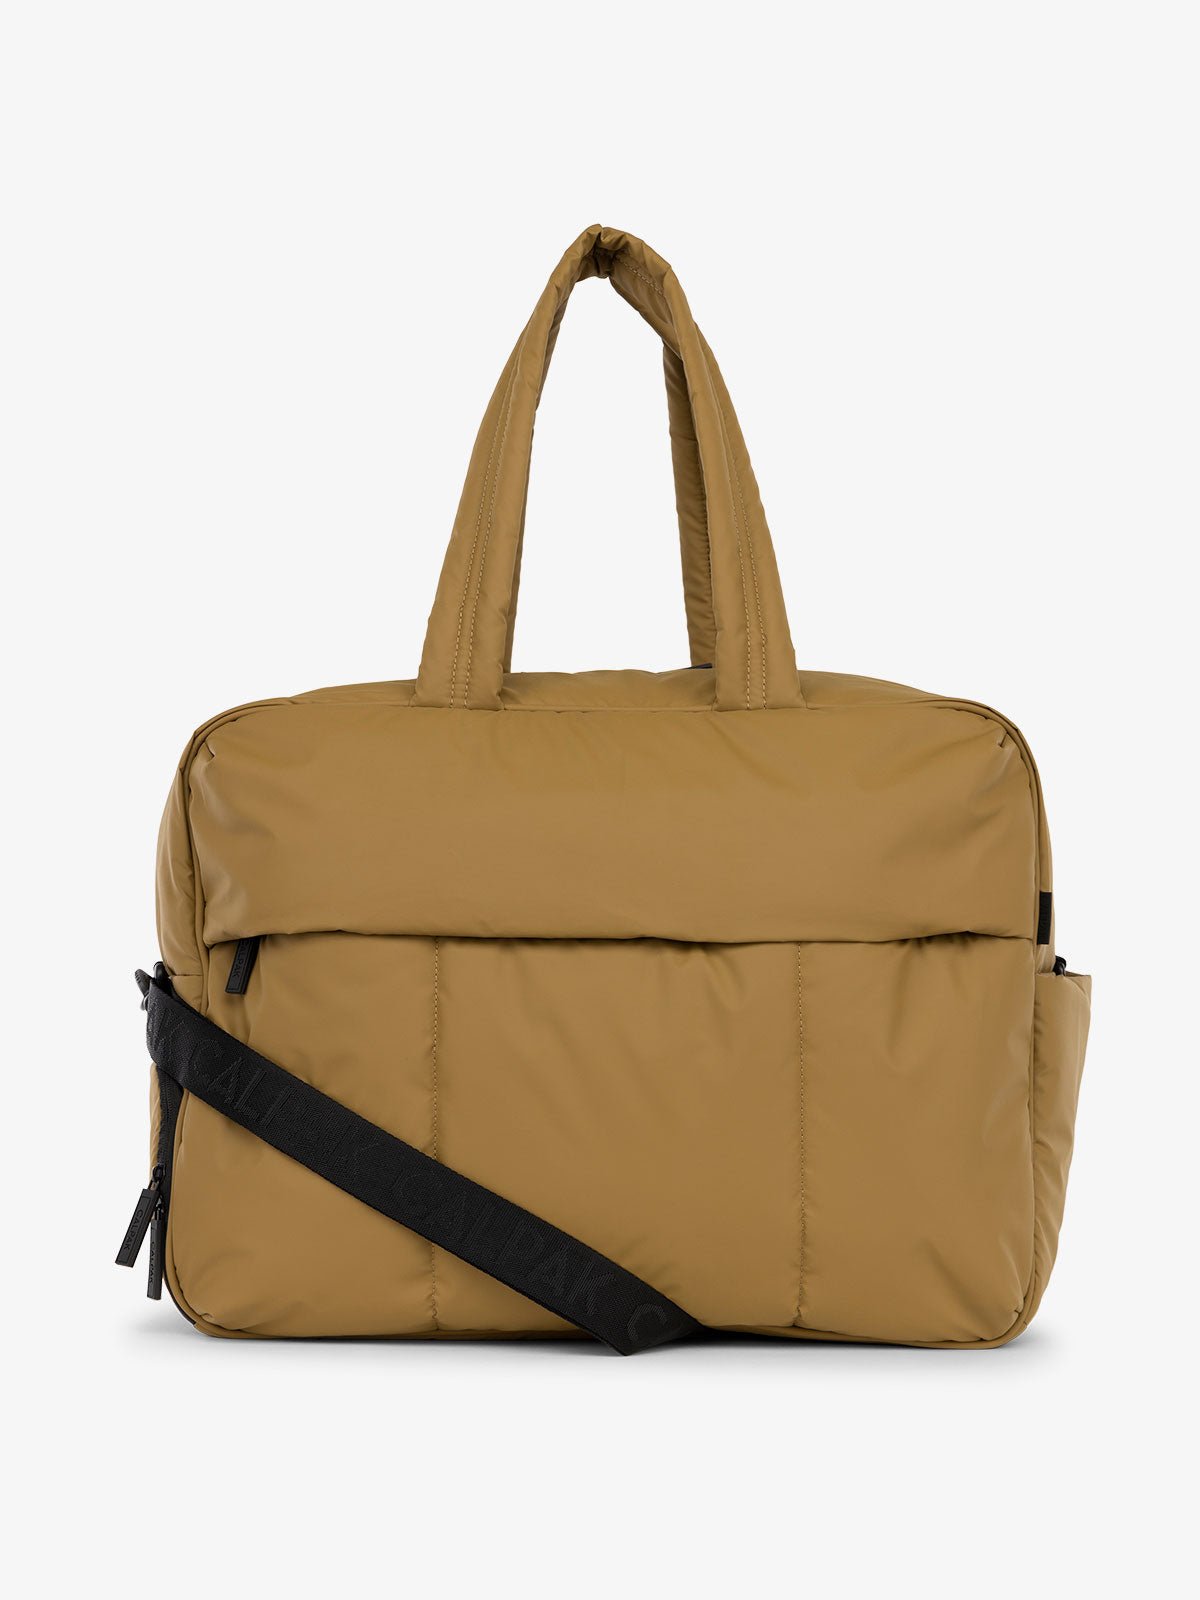 CALPAK Luka large duffle bag with detachable strap and zippered front pocket in khaki